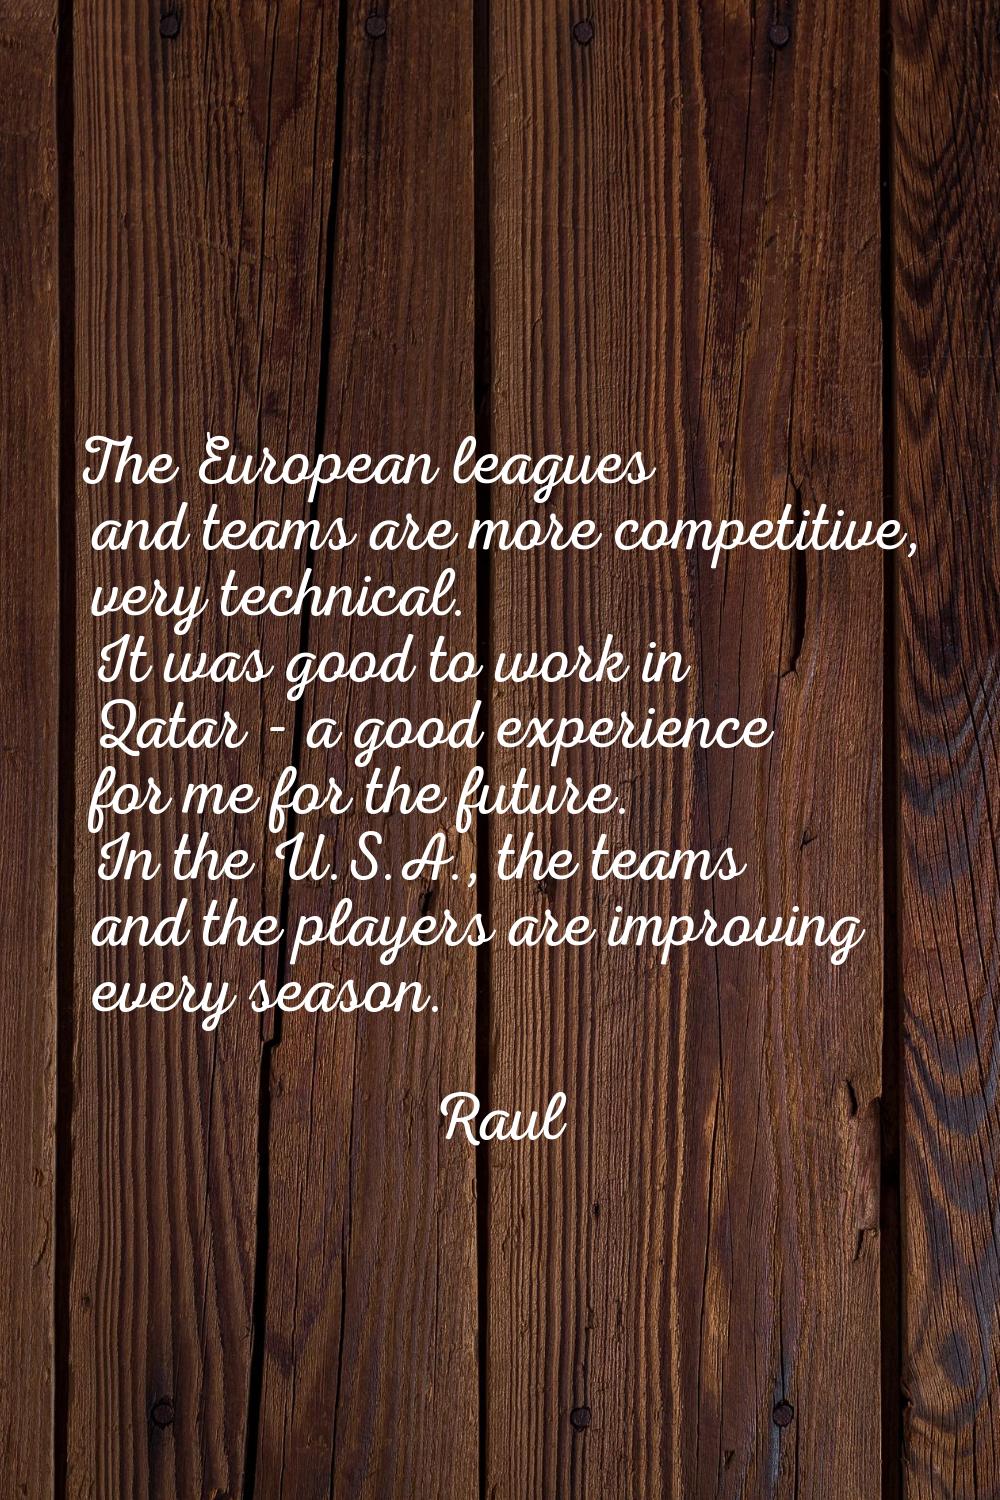 The European leagues and teams are more competitive, very technical. It was good to work in Qatar -